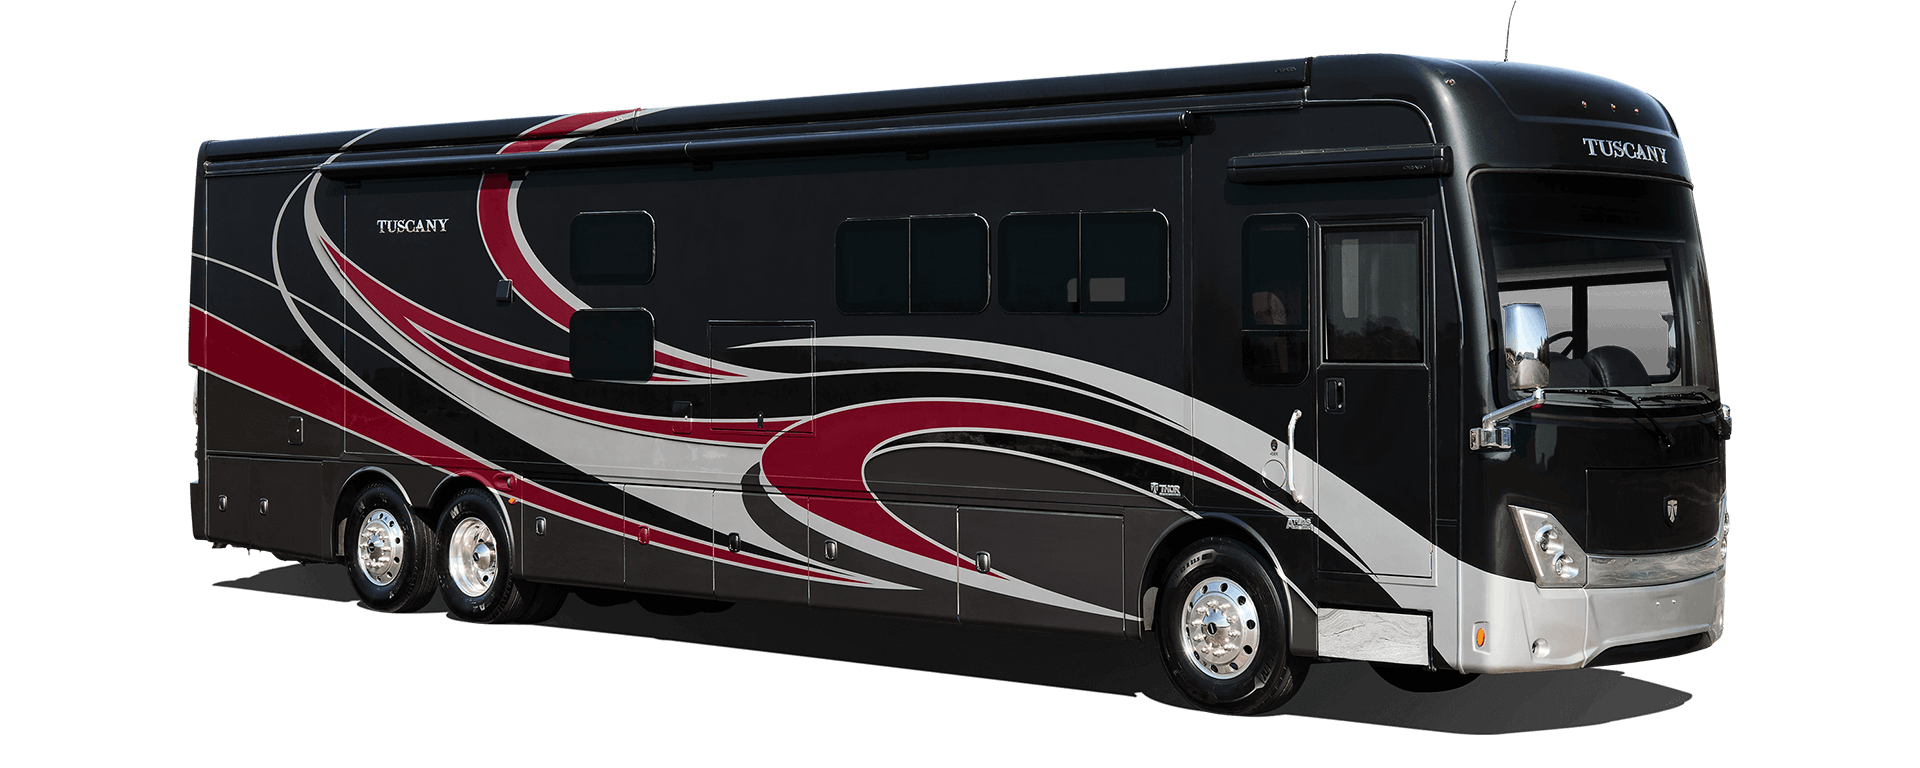 2022 Thor Tuscany Class A Diesel Pusher RV Renegade Full Body Paint Exterior